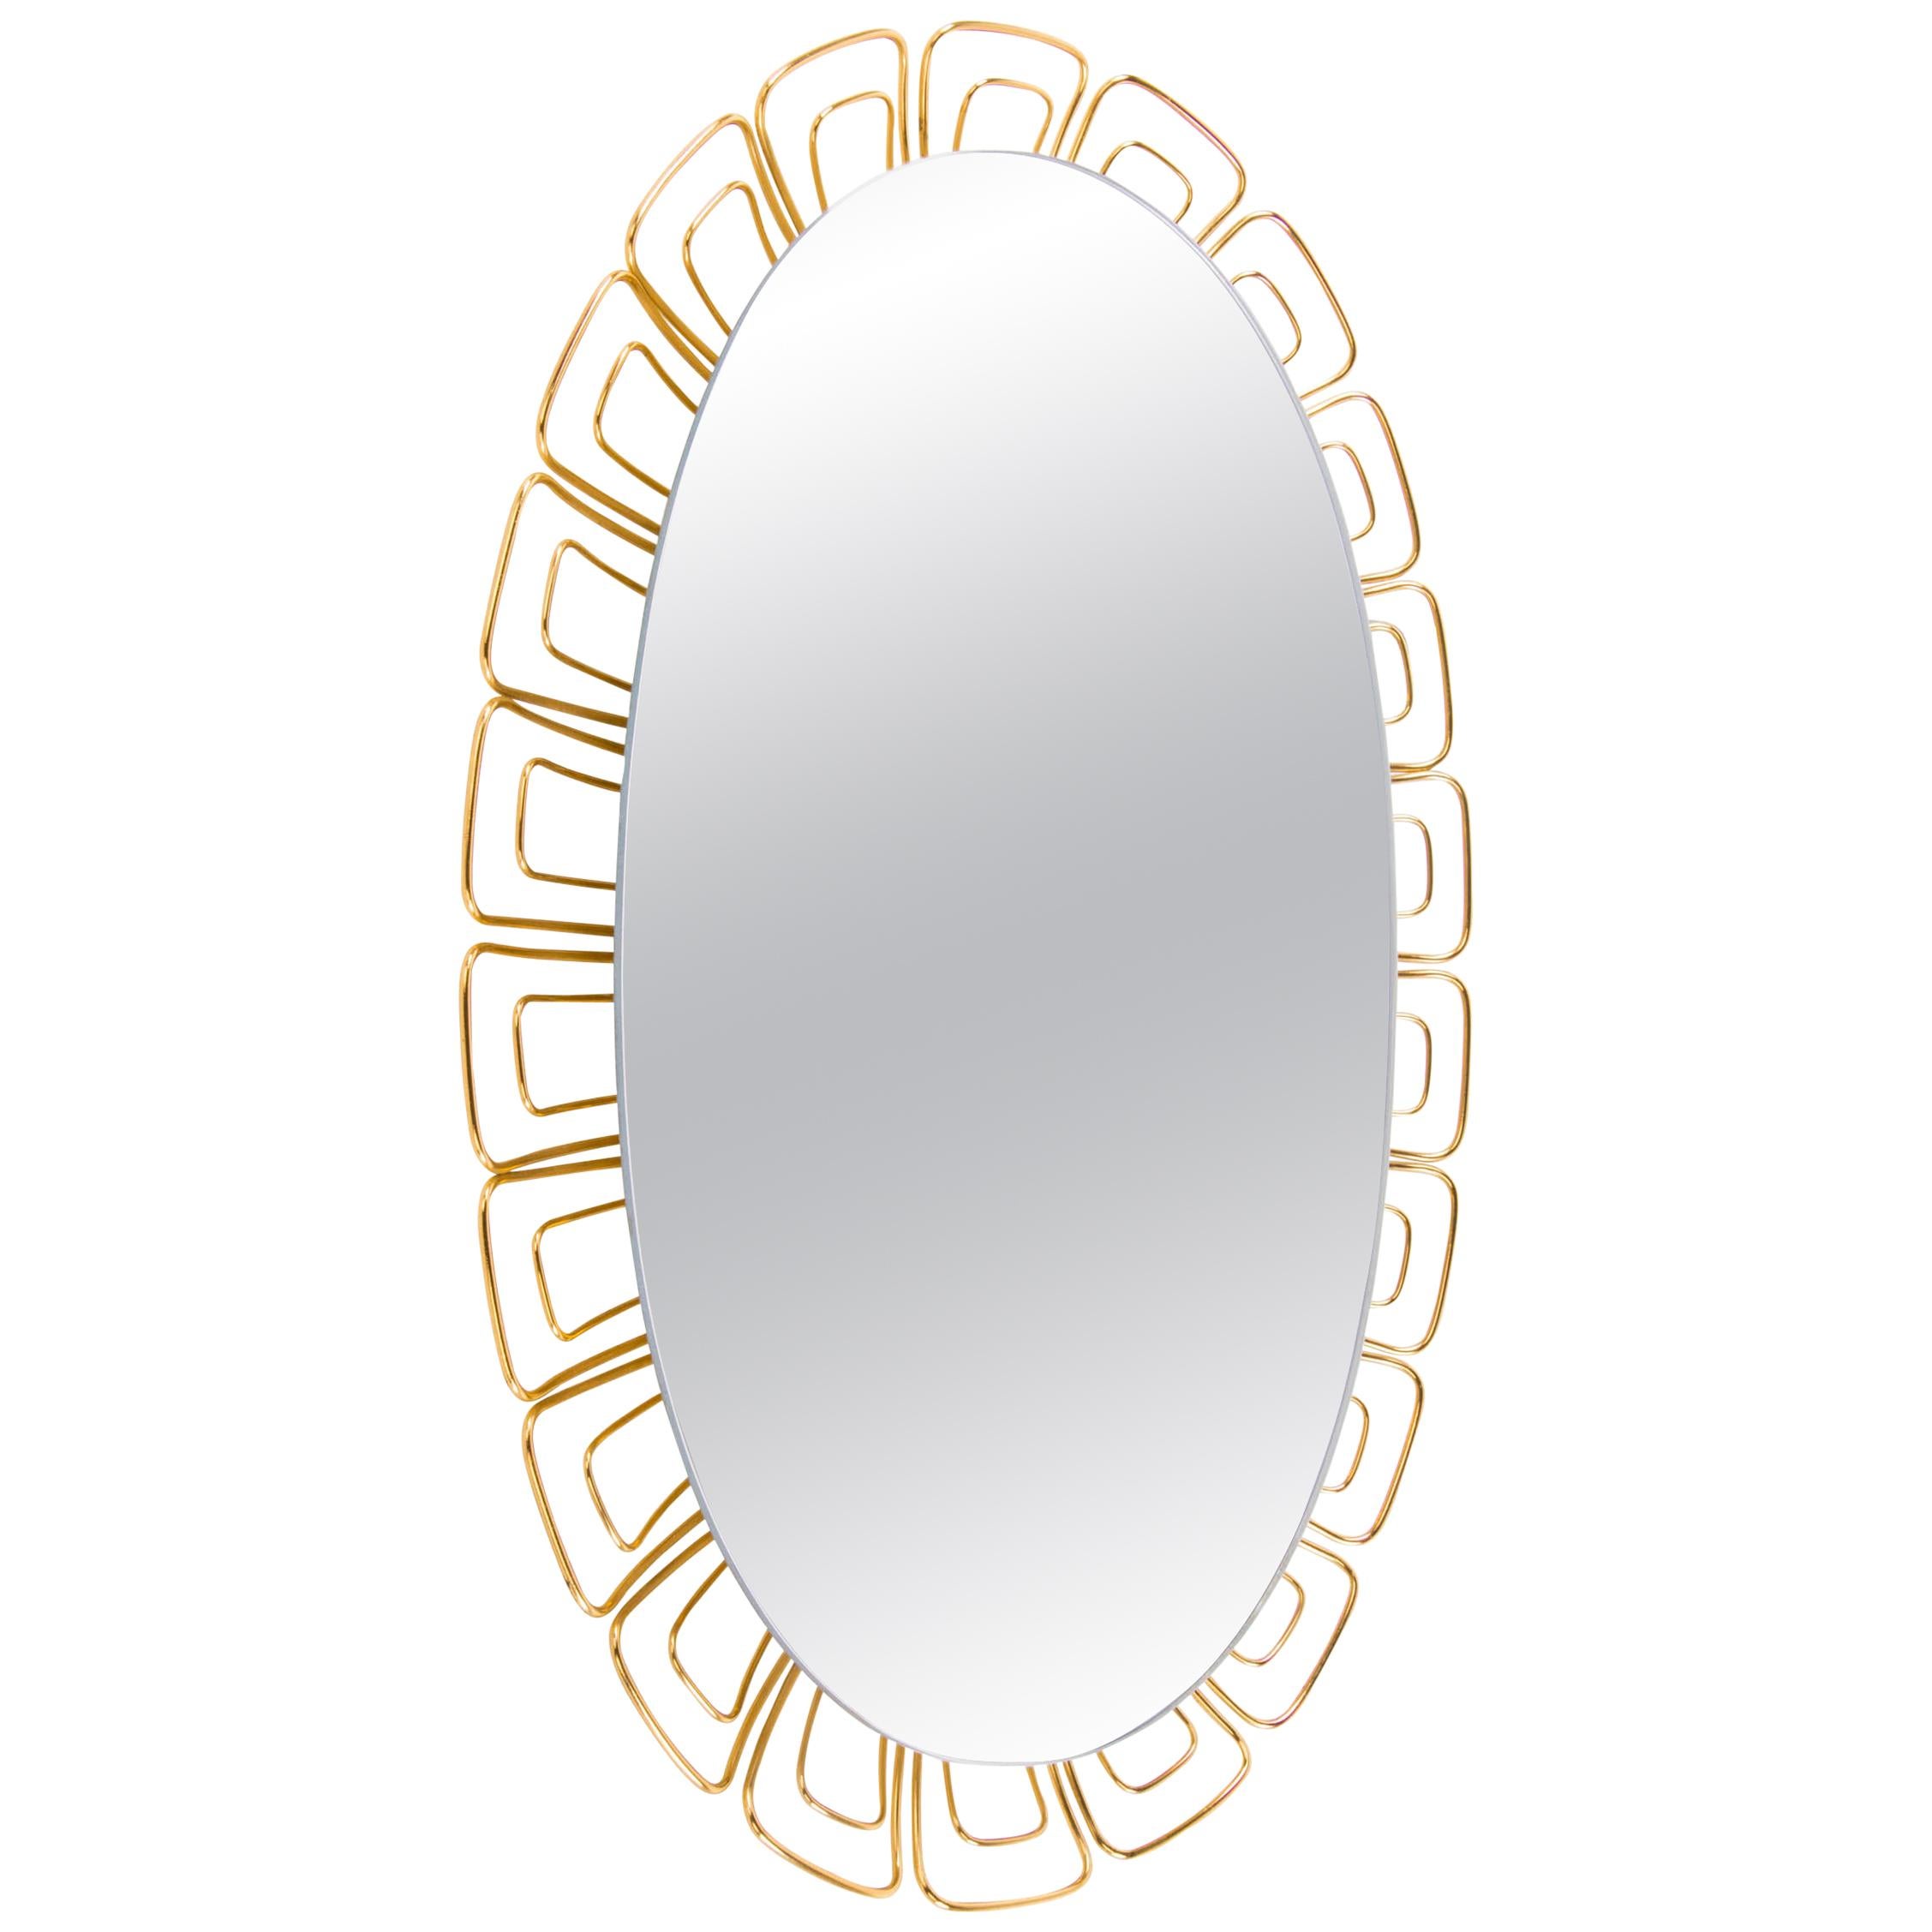 Illuminated Oval 26" Backlit Mirror Glass & Brass by Hillebrand, Germany 1950s For Sale